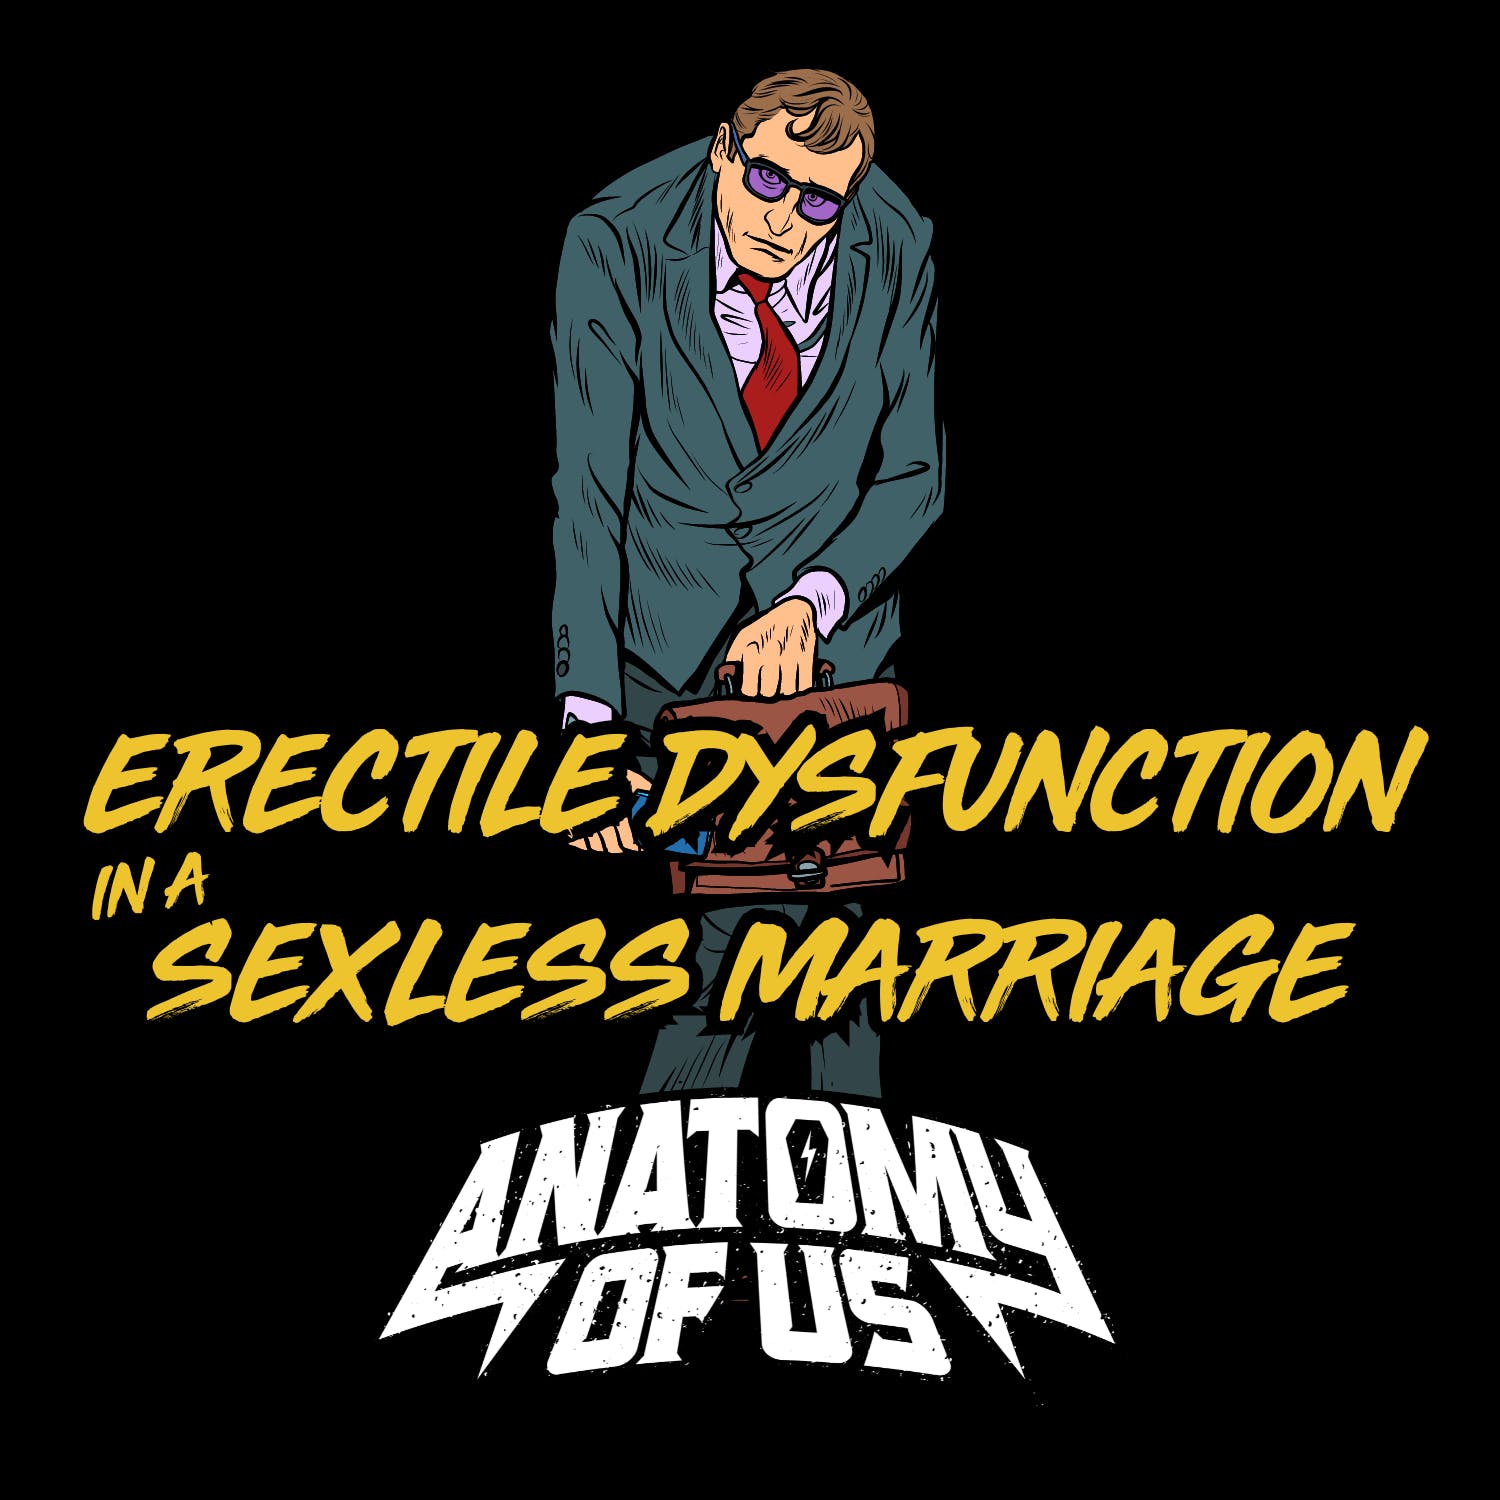 Erectile Dysfunction in a Sexless marriage